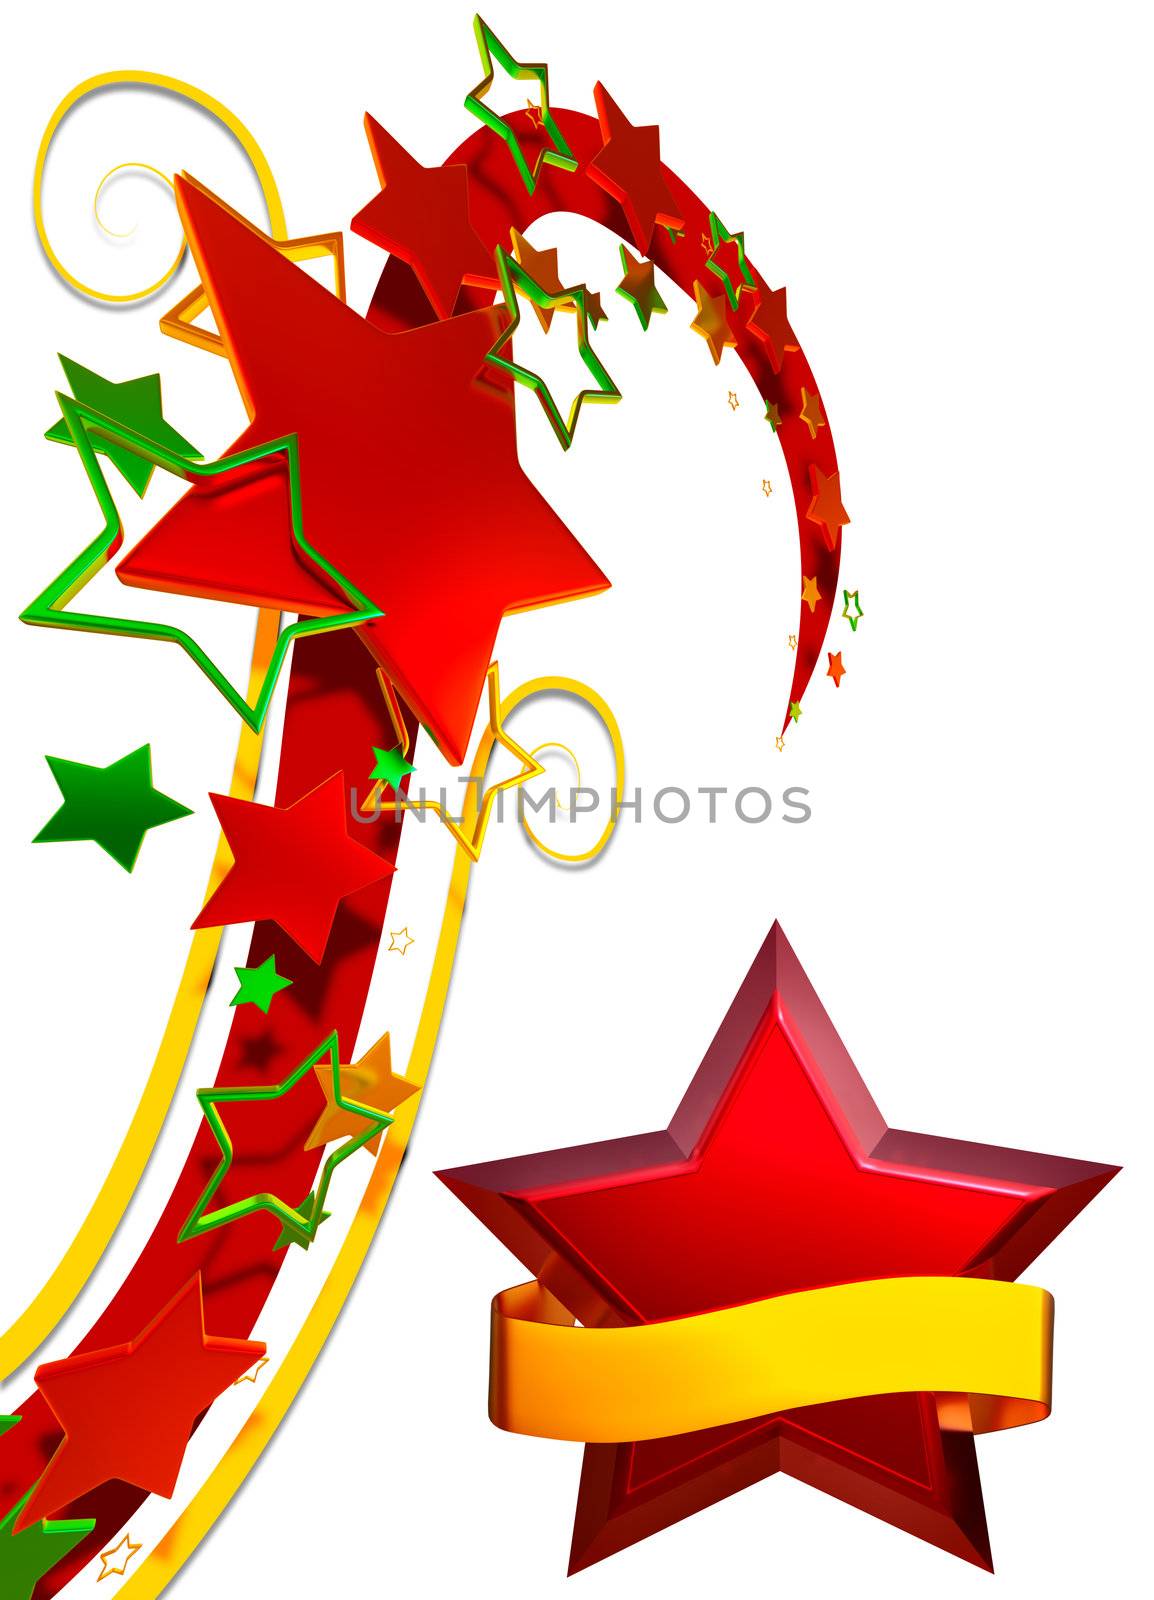 big and small stars in motion for advertise on white background